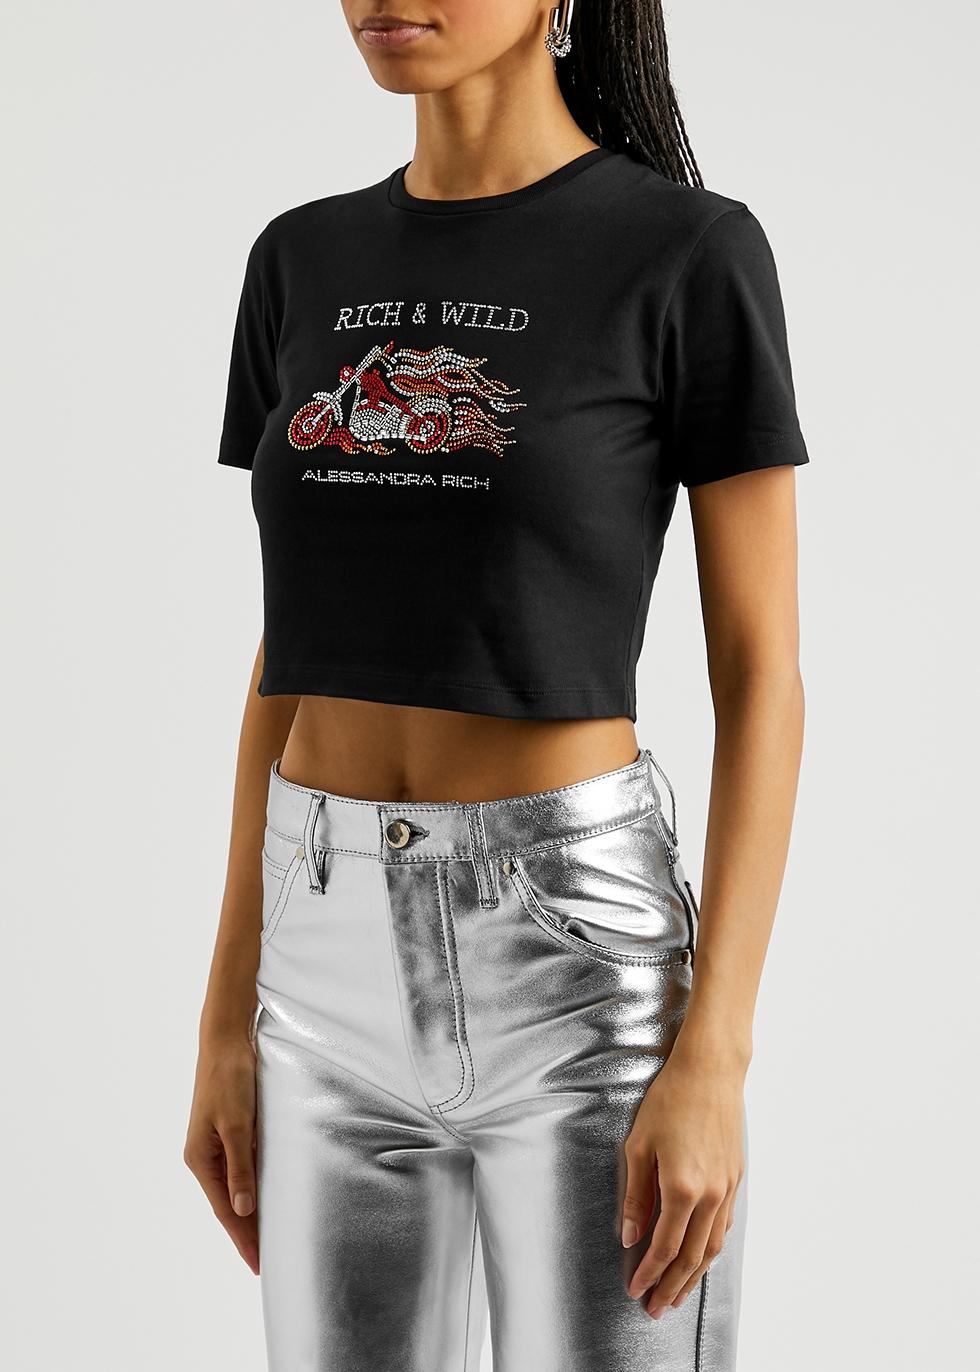 Alessandra Rich Rich & Wild Embellished Cropped Cotton T-shirt in Black |  Lyst